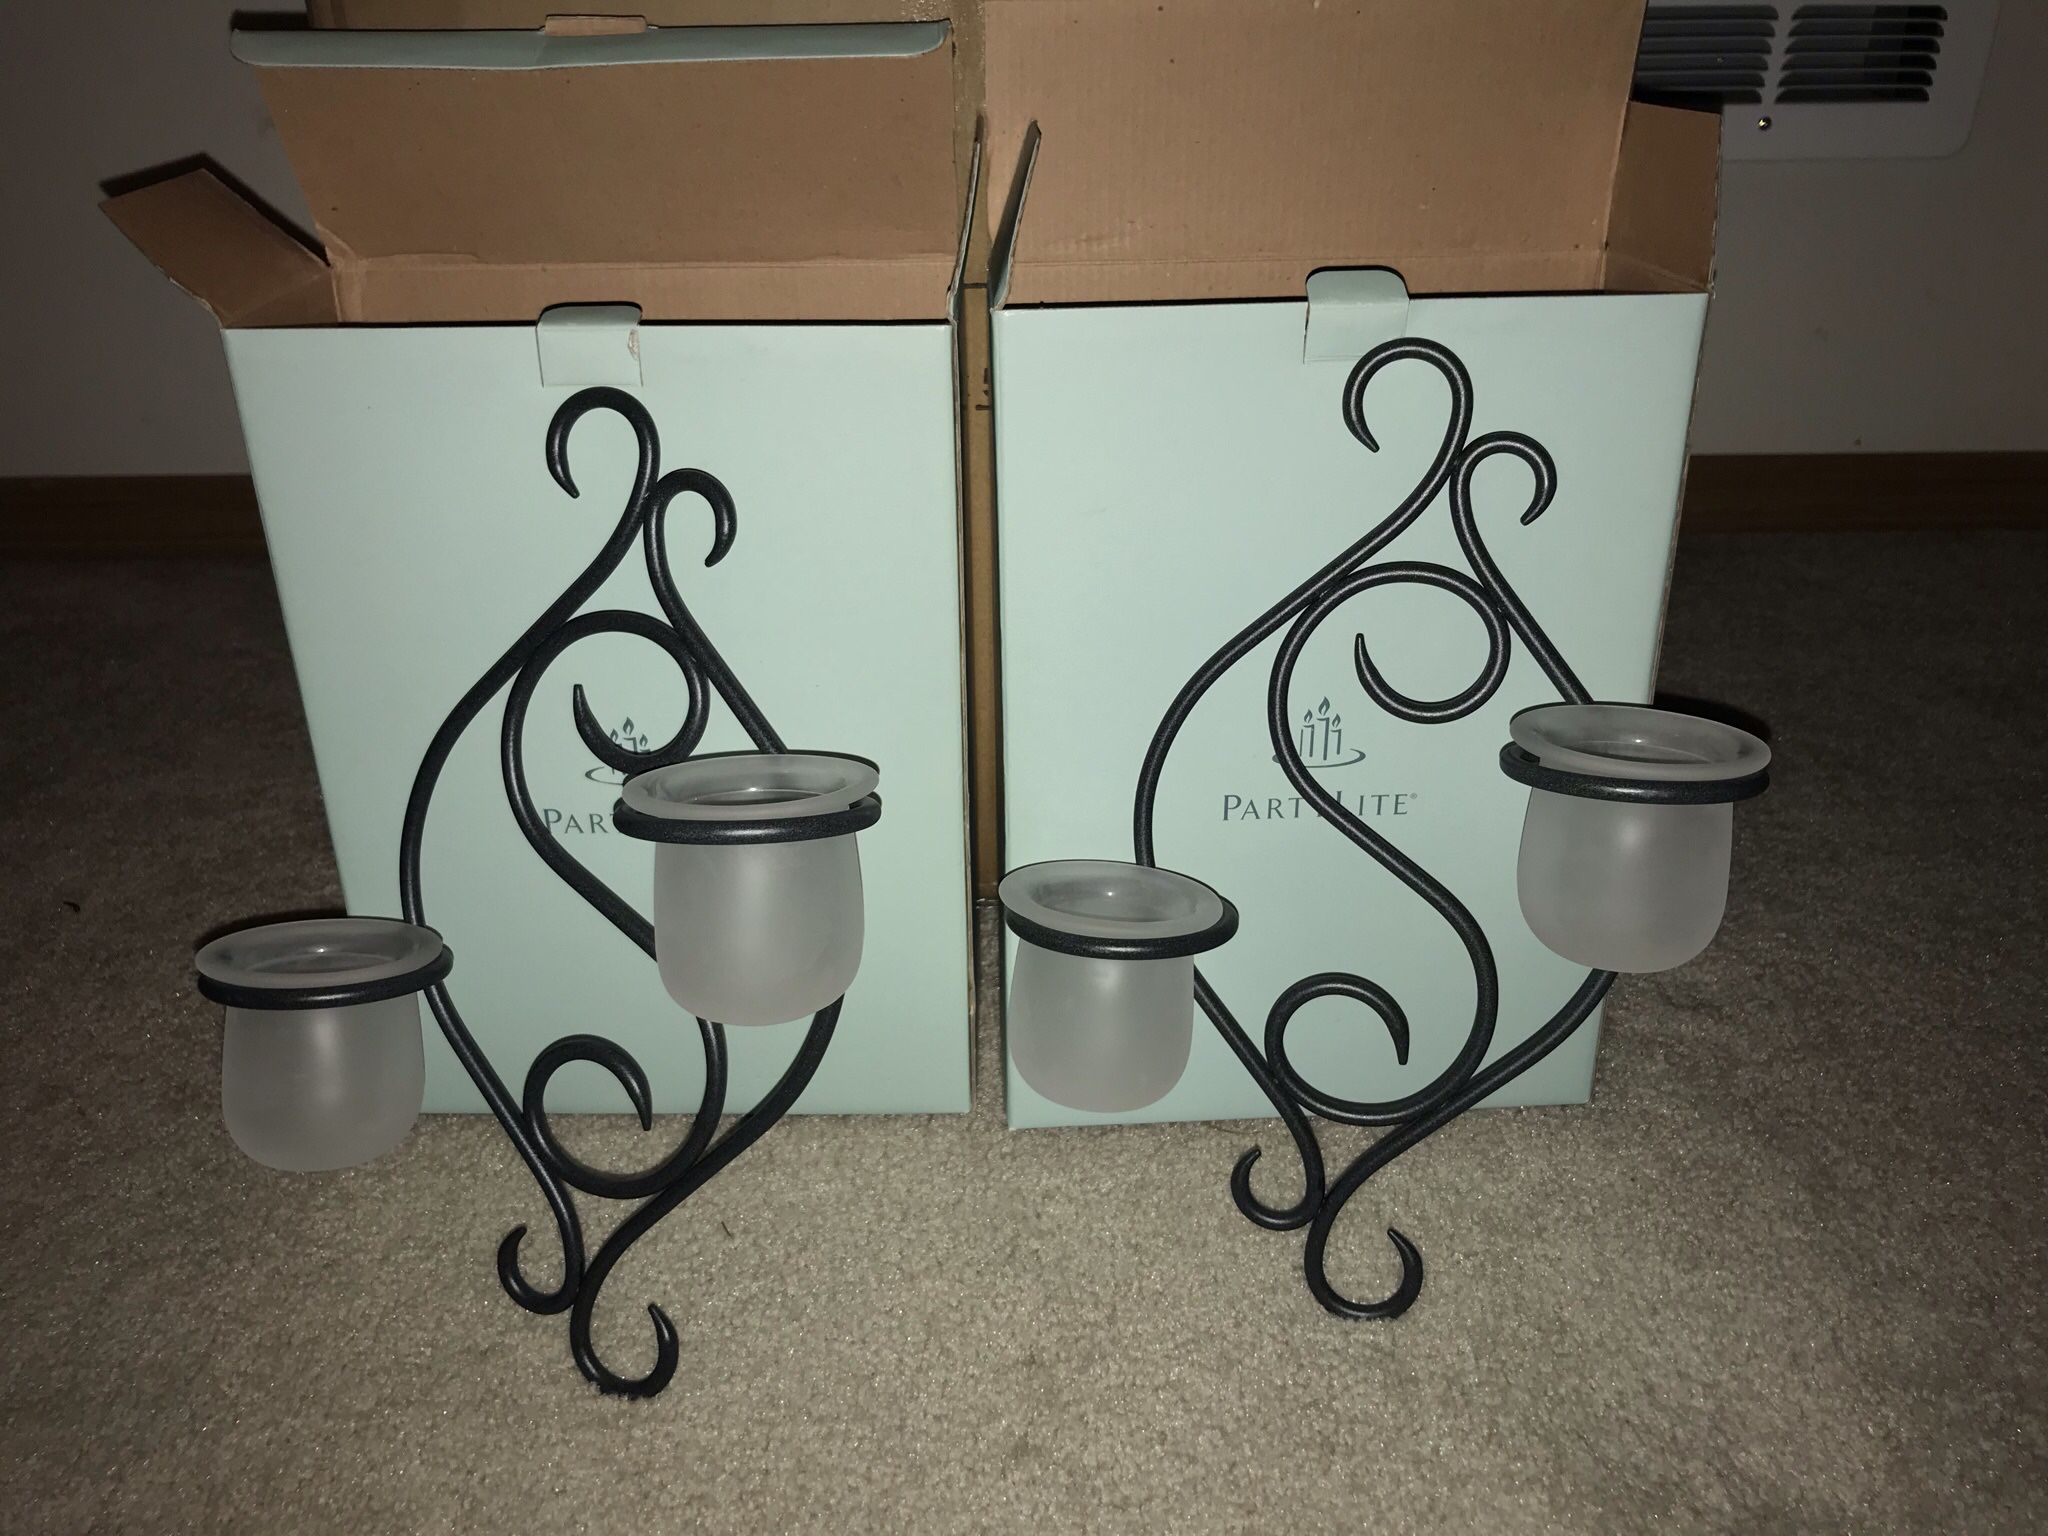 PartyLite Candle Wall Sconces